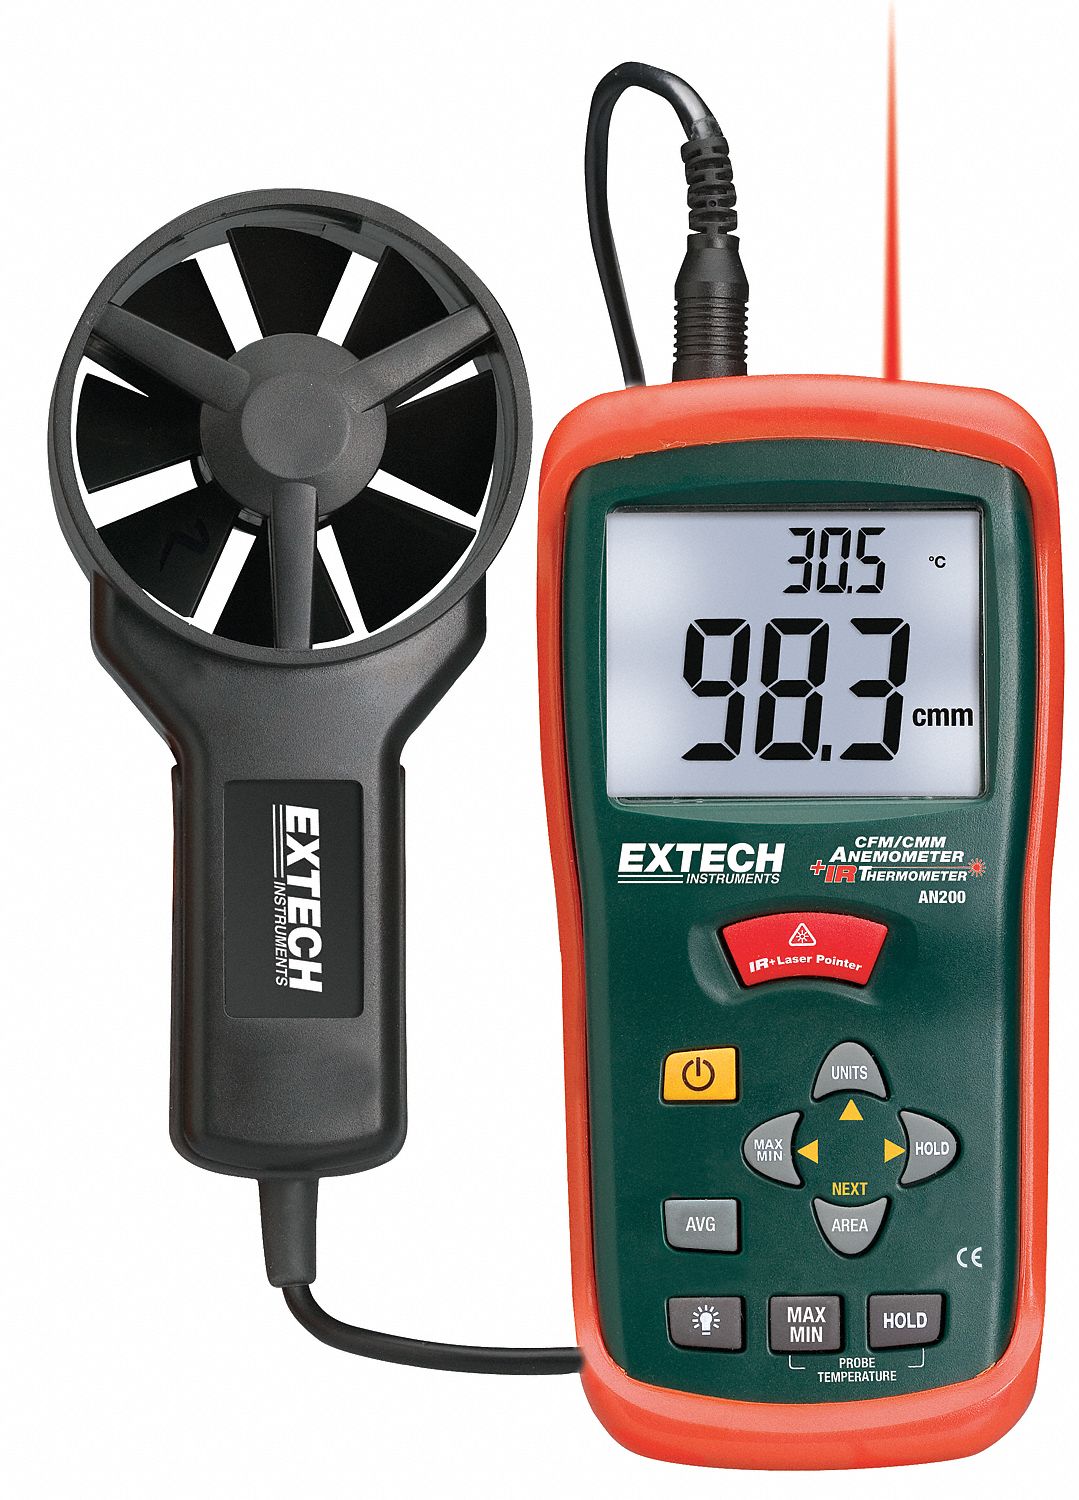 CFM/CMM THERMO-ANEMOMETER + INFRARE